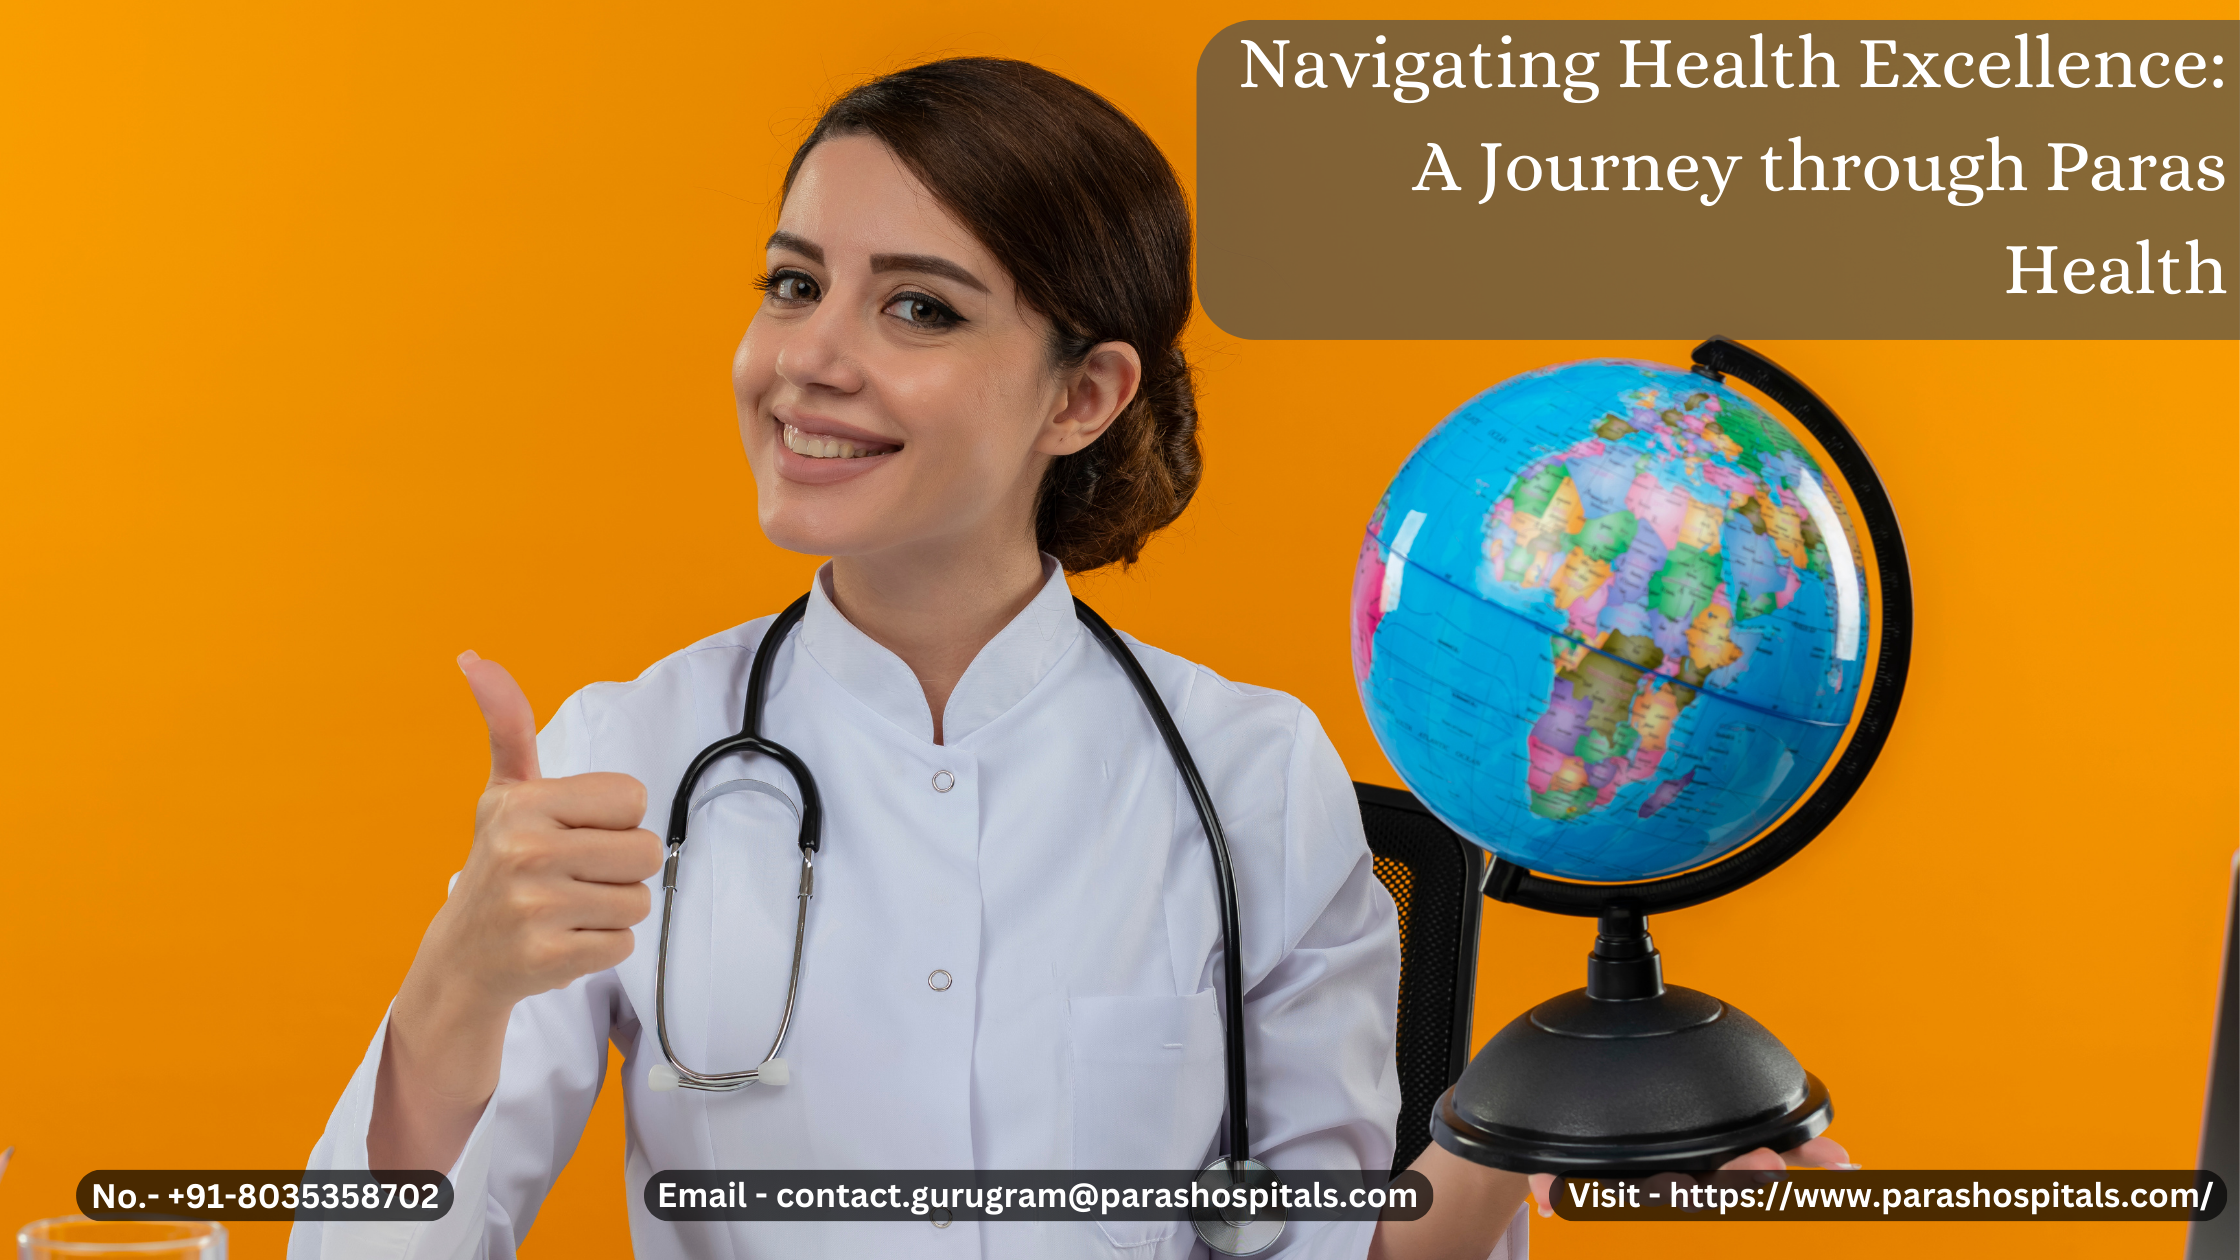 Navigating Health Excellence: A Journey through Paras Health